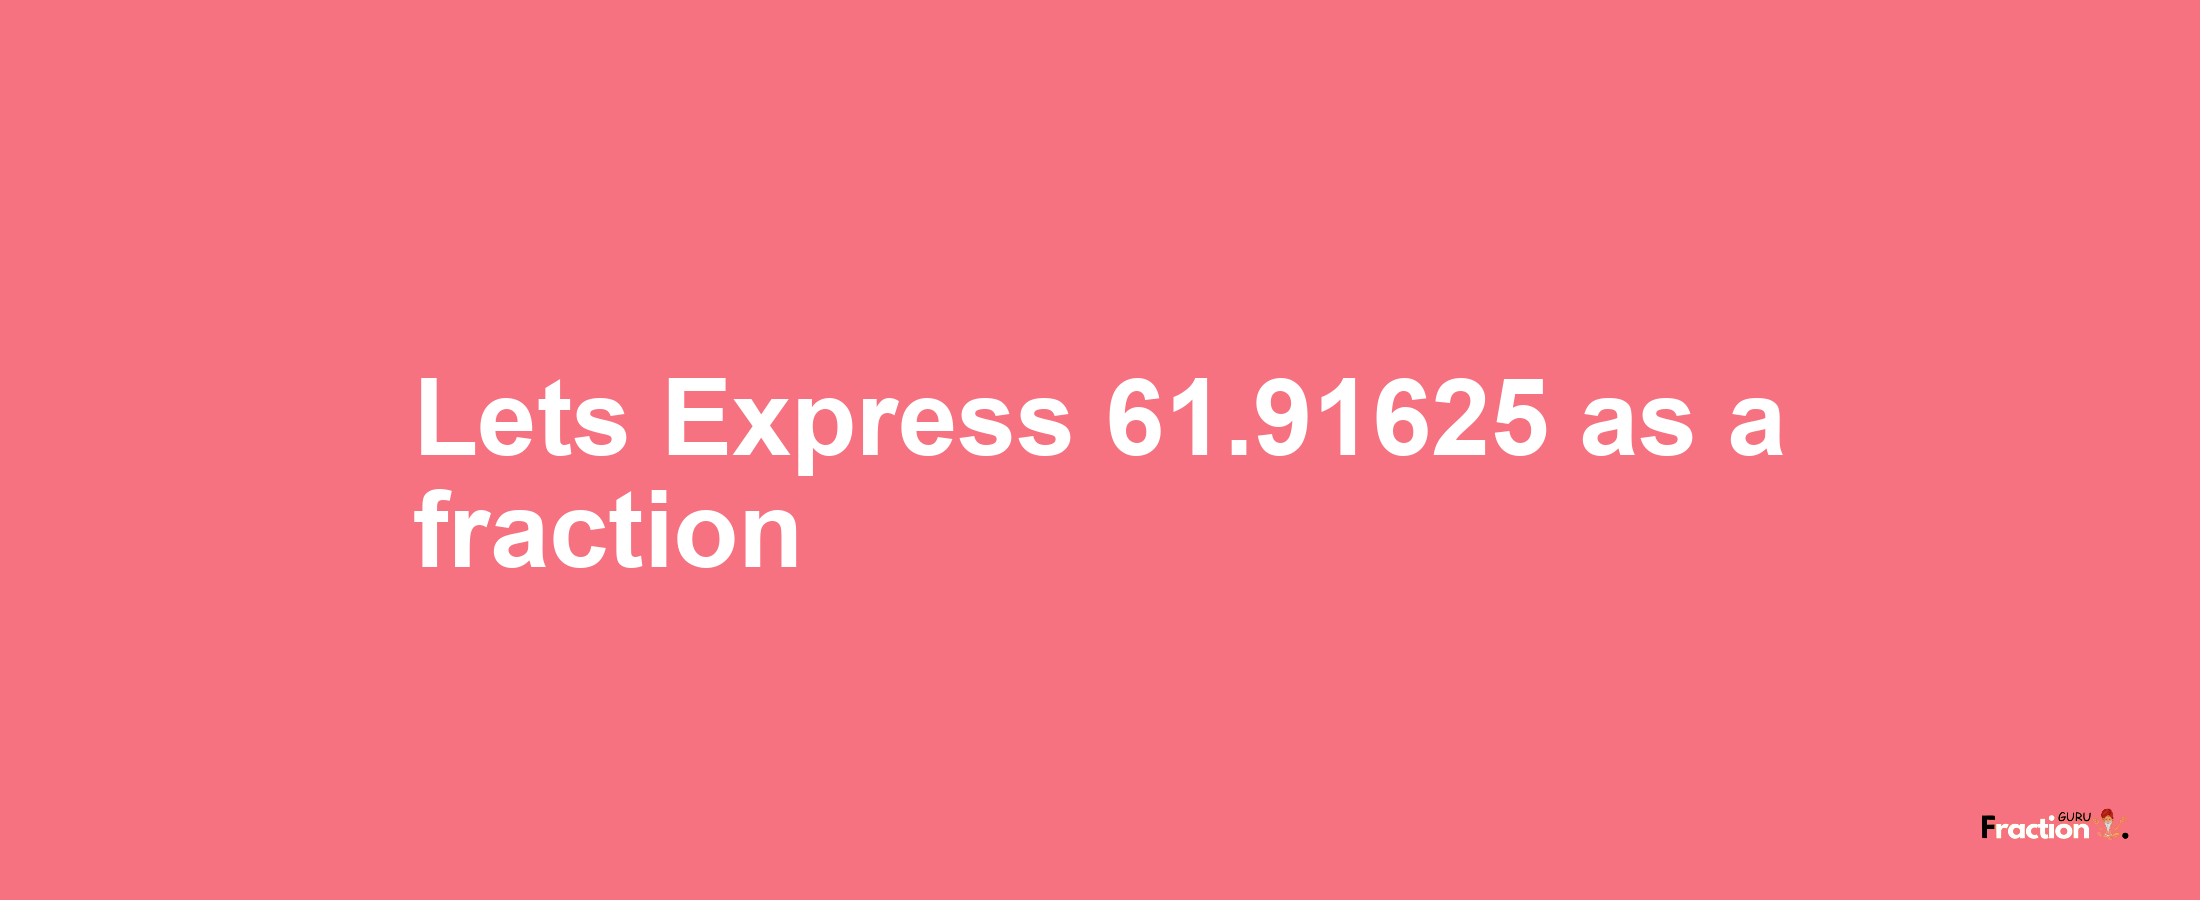 Lets Express 61.91625 as afraction